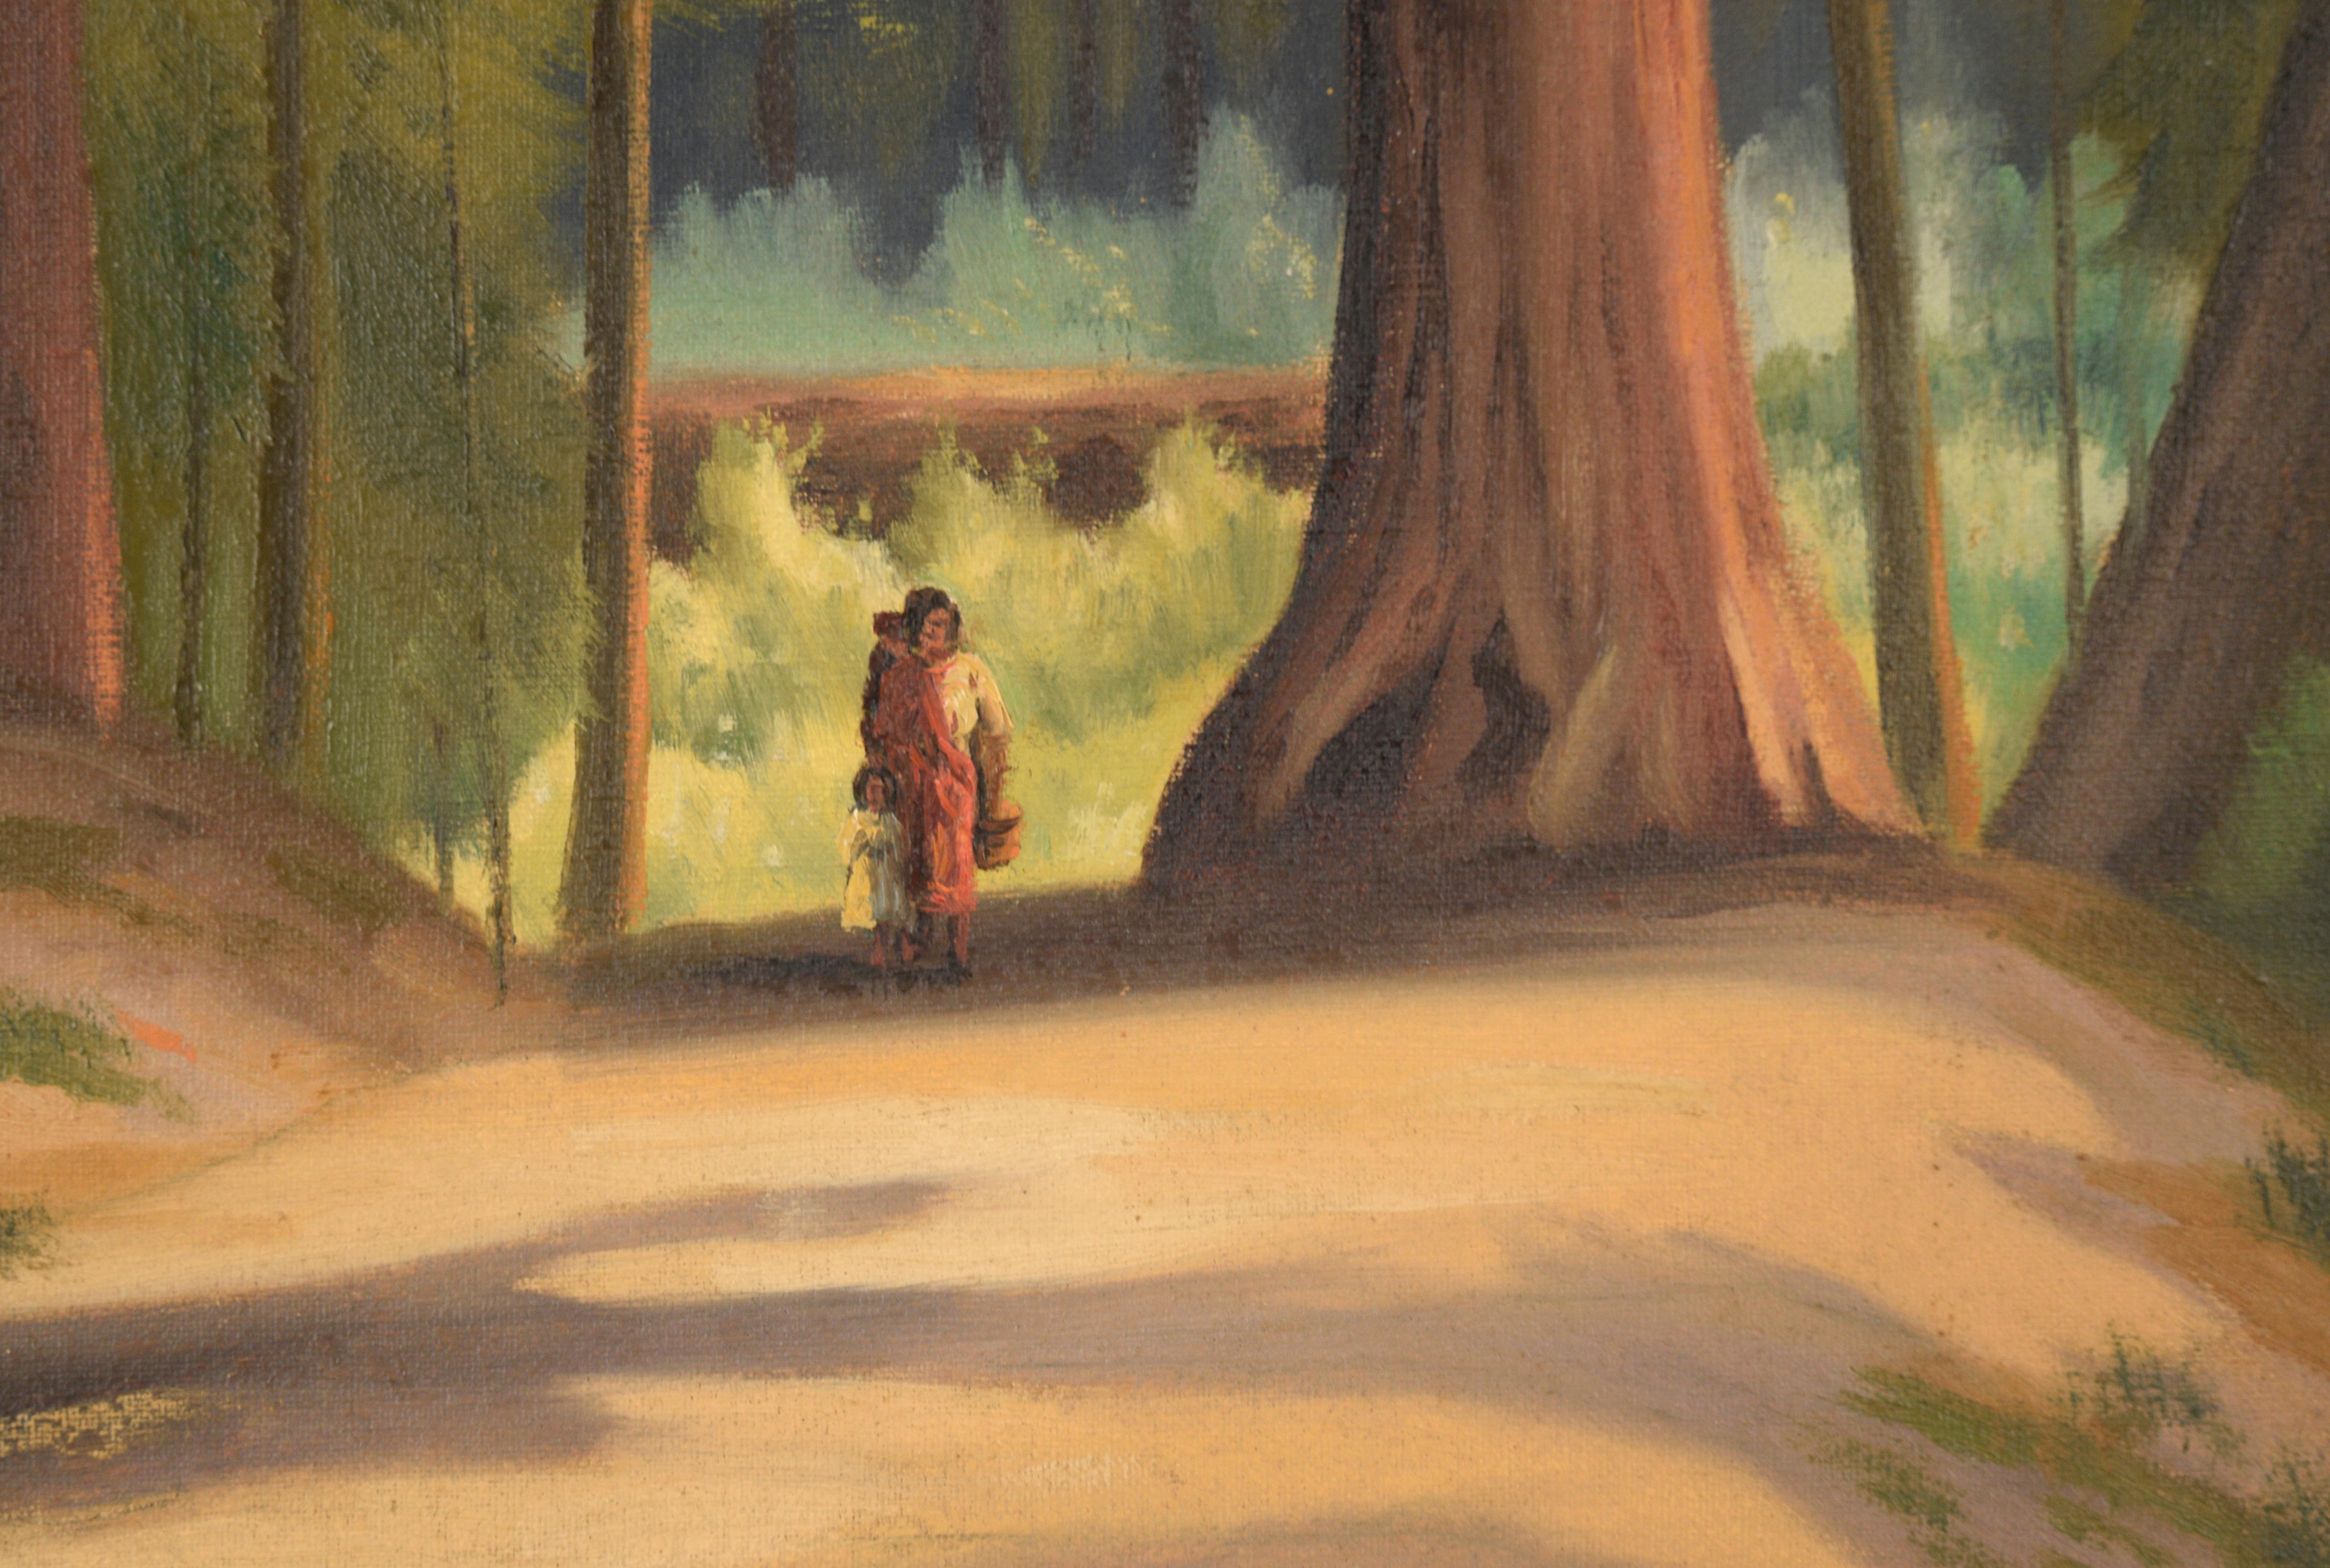 Ohlone Mother and Child Walking Through the Santa Cruz Redwoods - Landscape 1930 - American Impressionist Painting by Anton Dahl